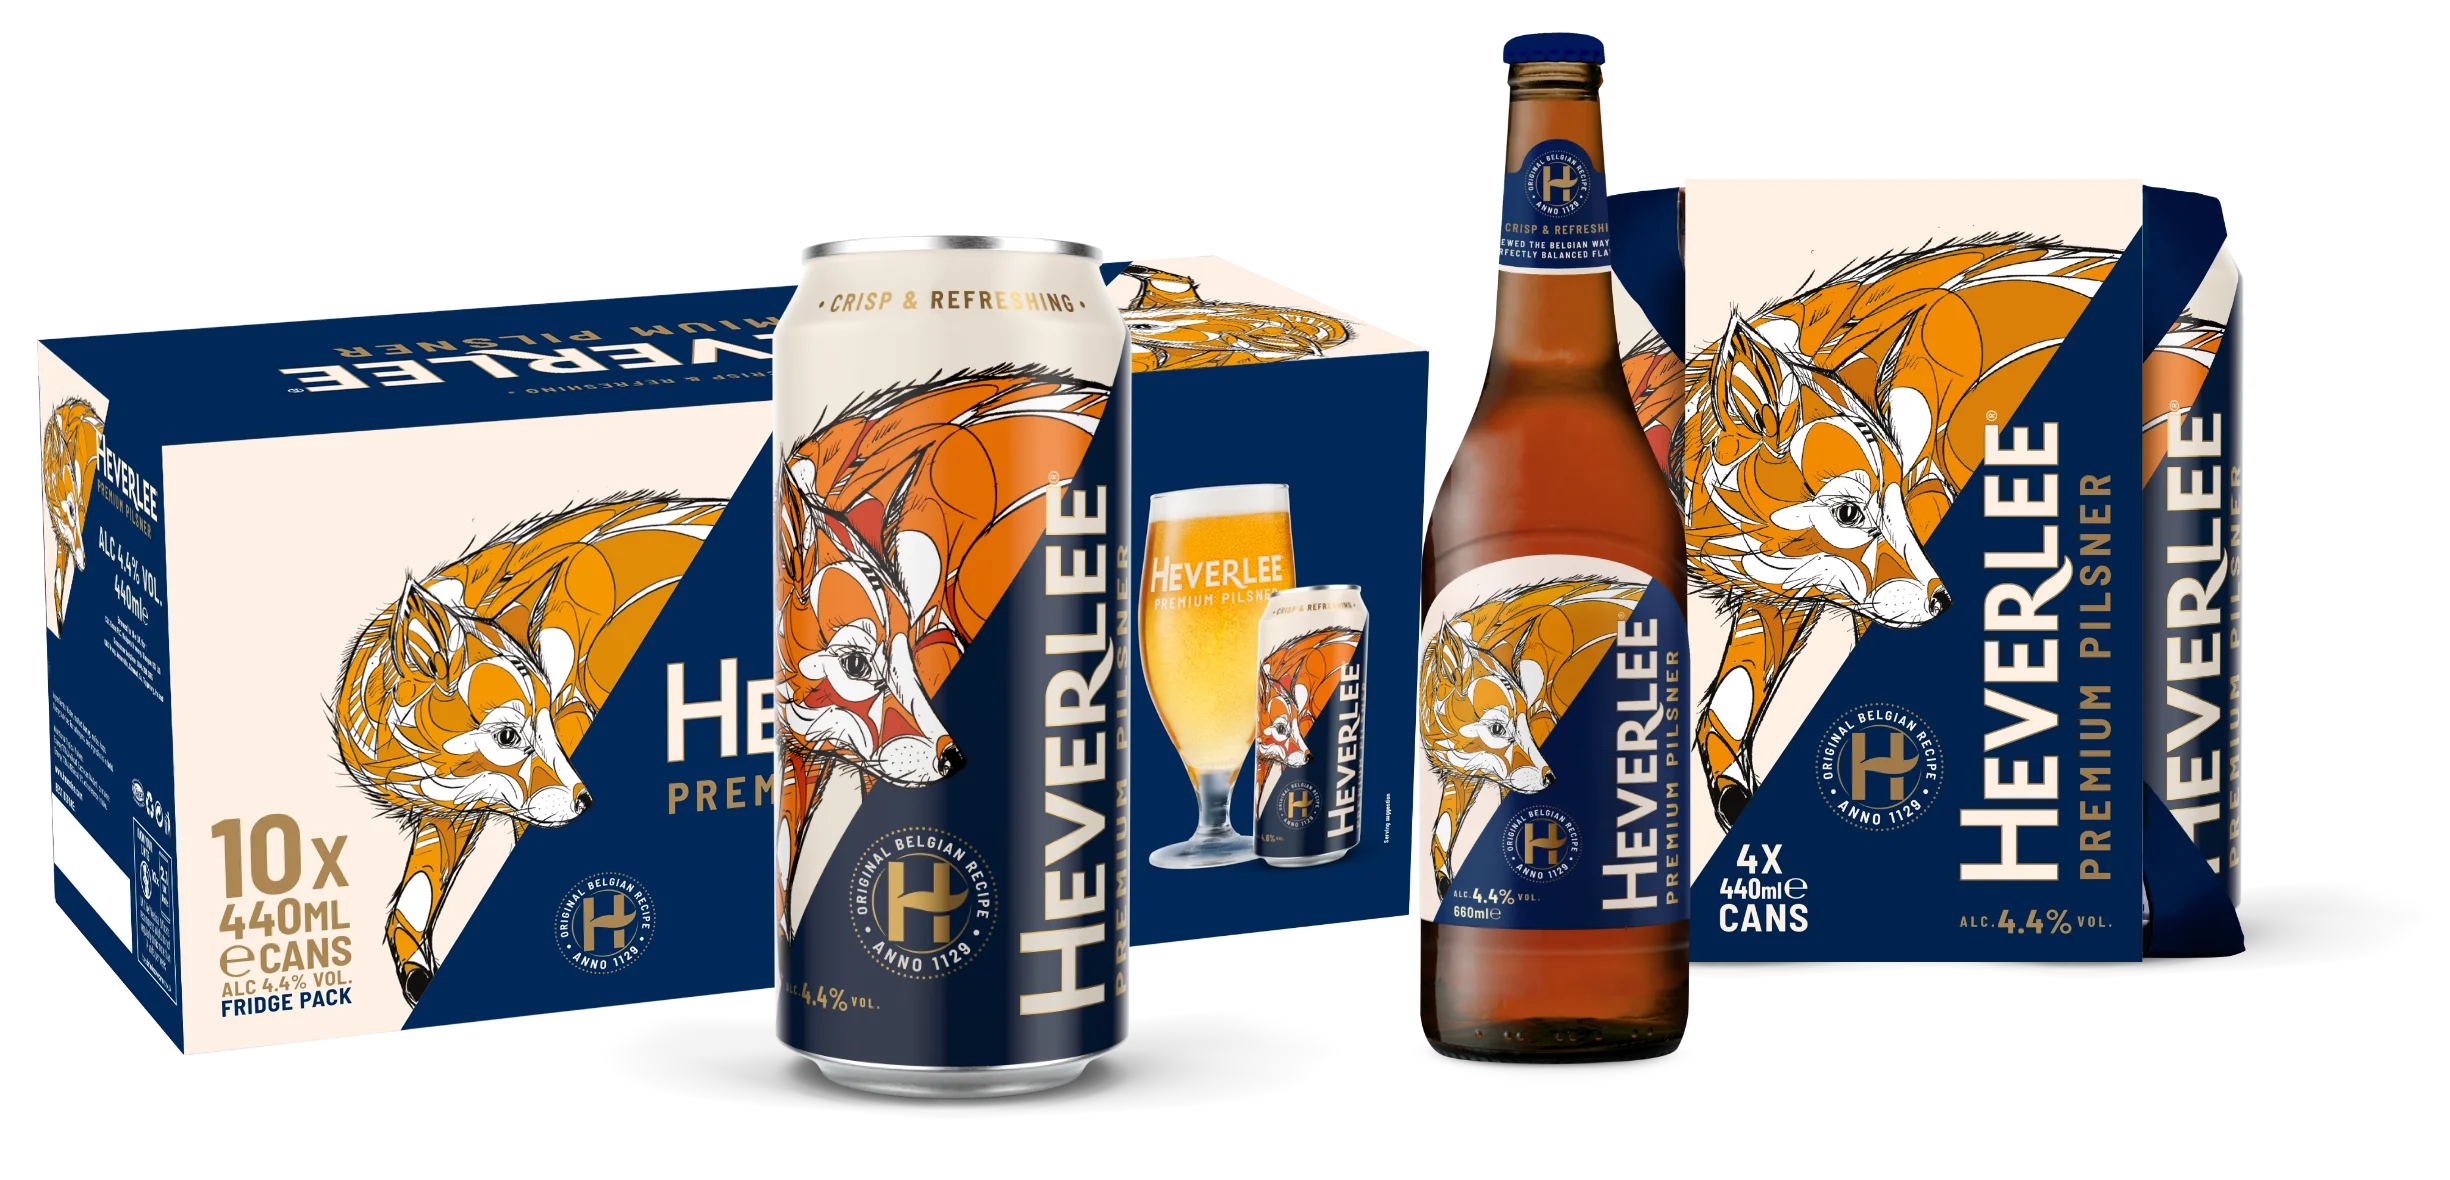 Heverlee products